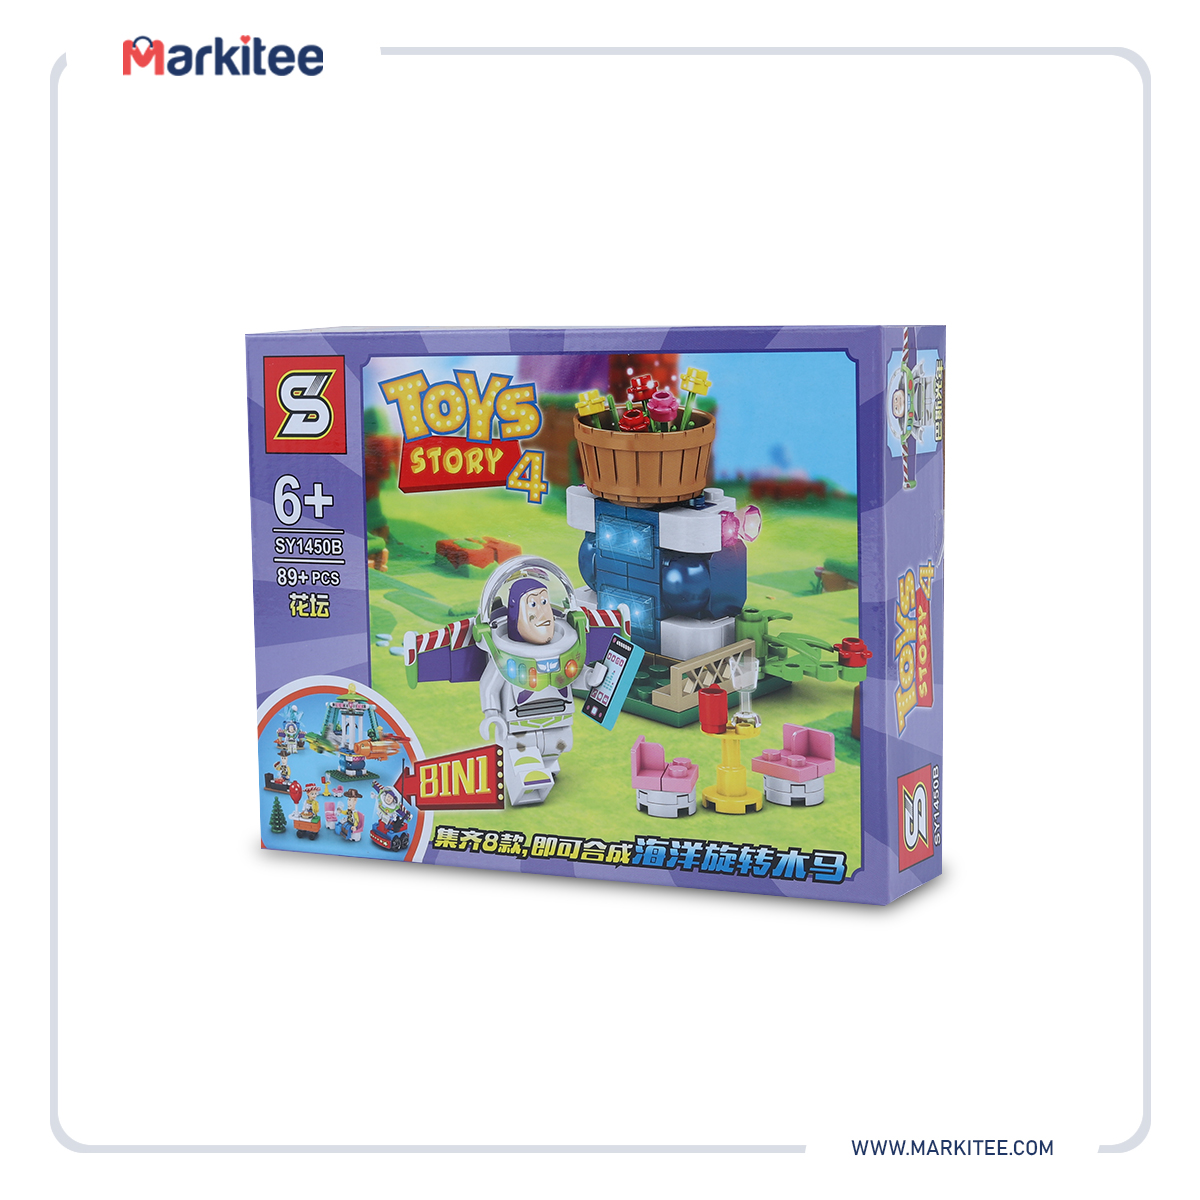 Toy Story 4 8 in 1 Bui...-BR-SY1450B